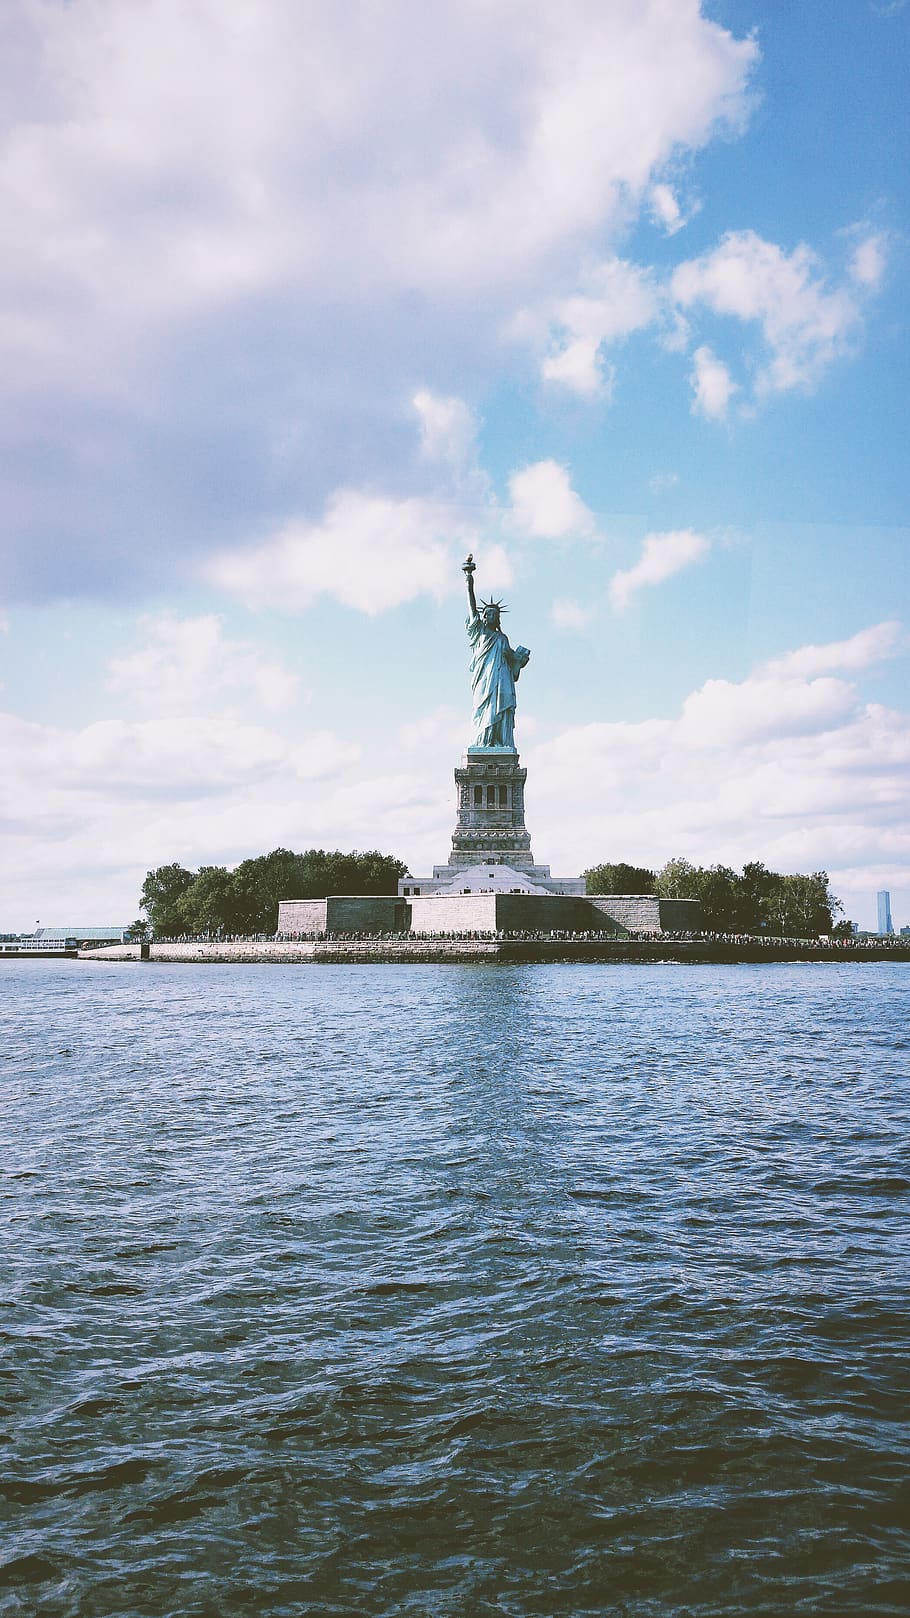 HD wallpaper: Statue of Liberty, New York Harbour, lady liberty ...